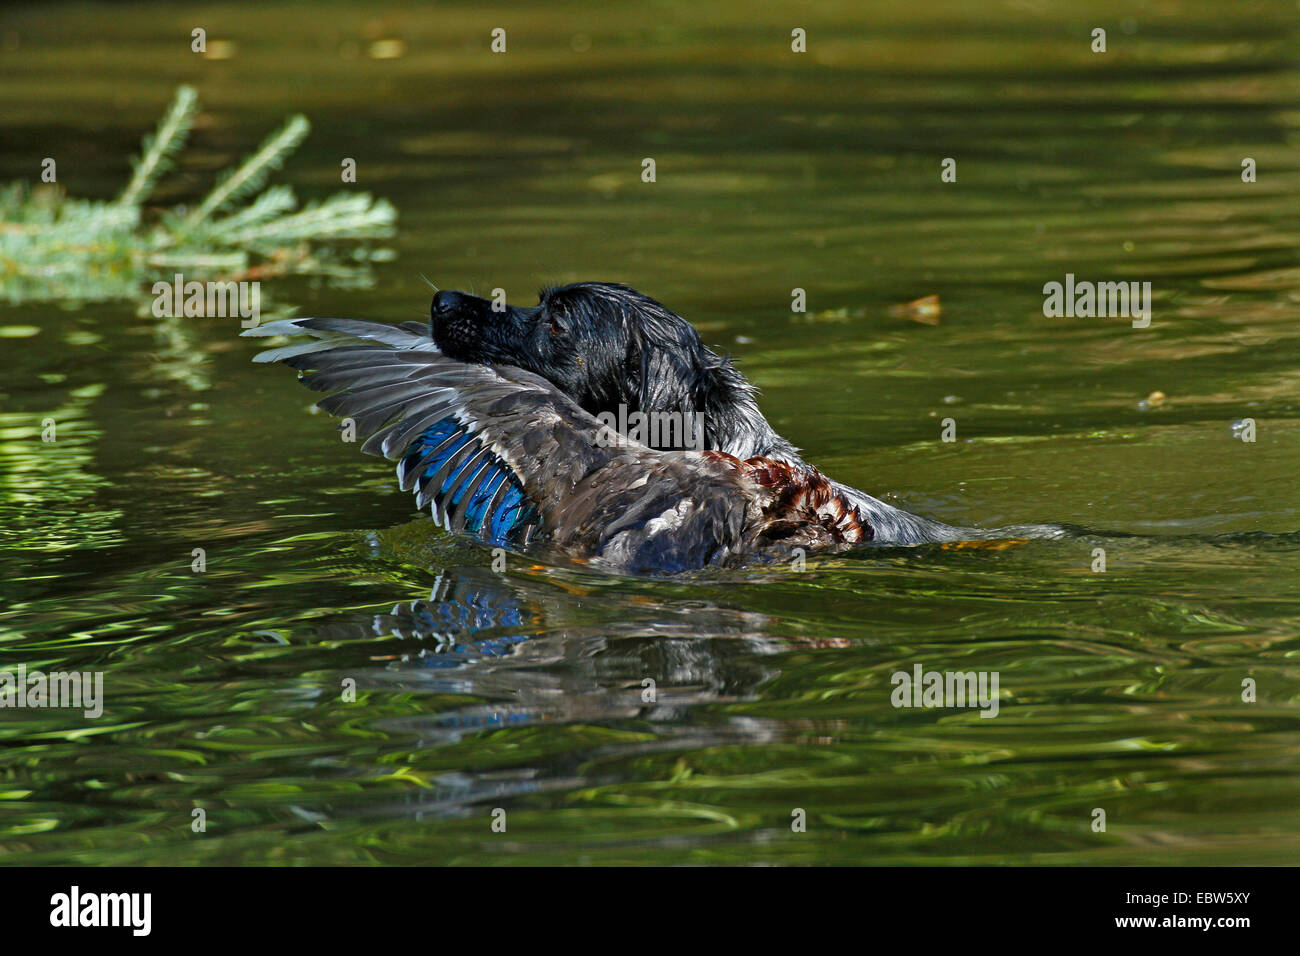 Brittany (Canis lupus f. familiaris), hunting dog swimming and retrieving a shot duck, Germany Stock Photo